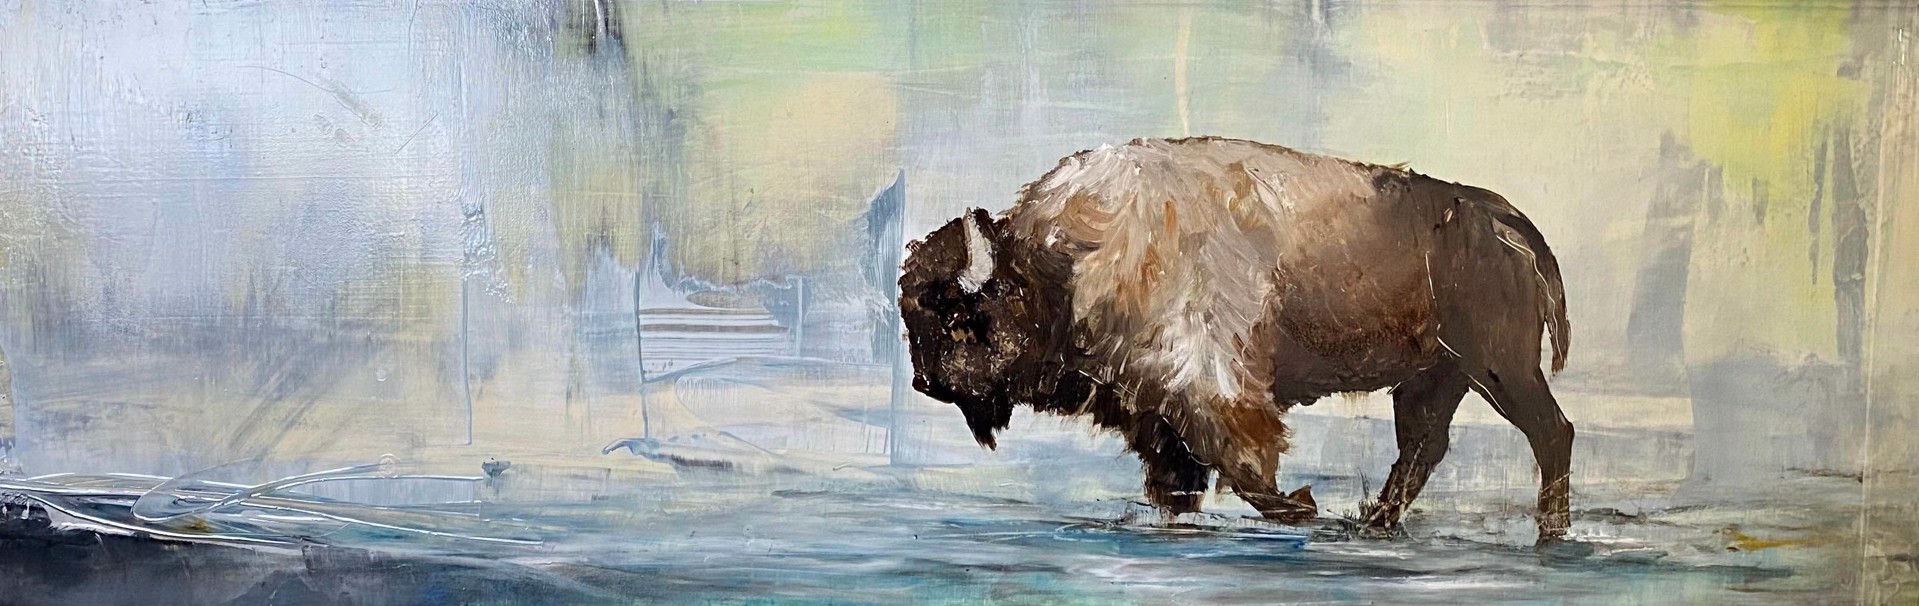 Lone Bison Bull Walking Though An Abstract Landscape.